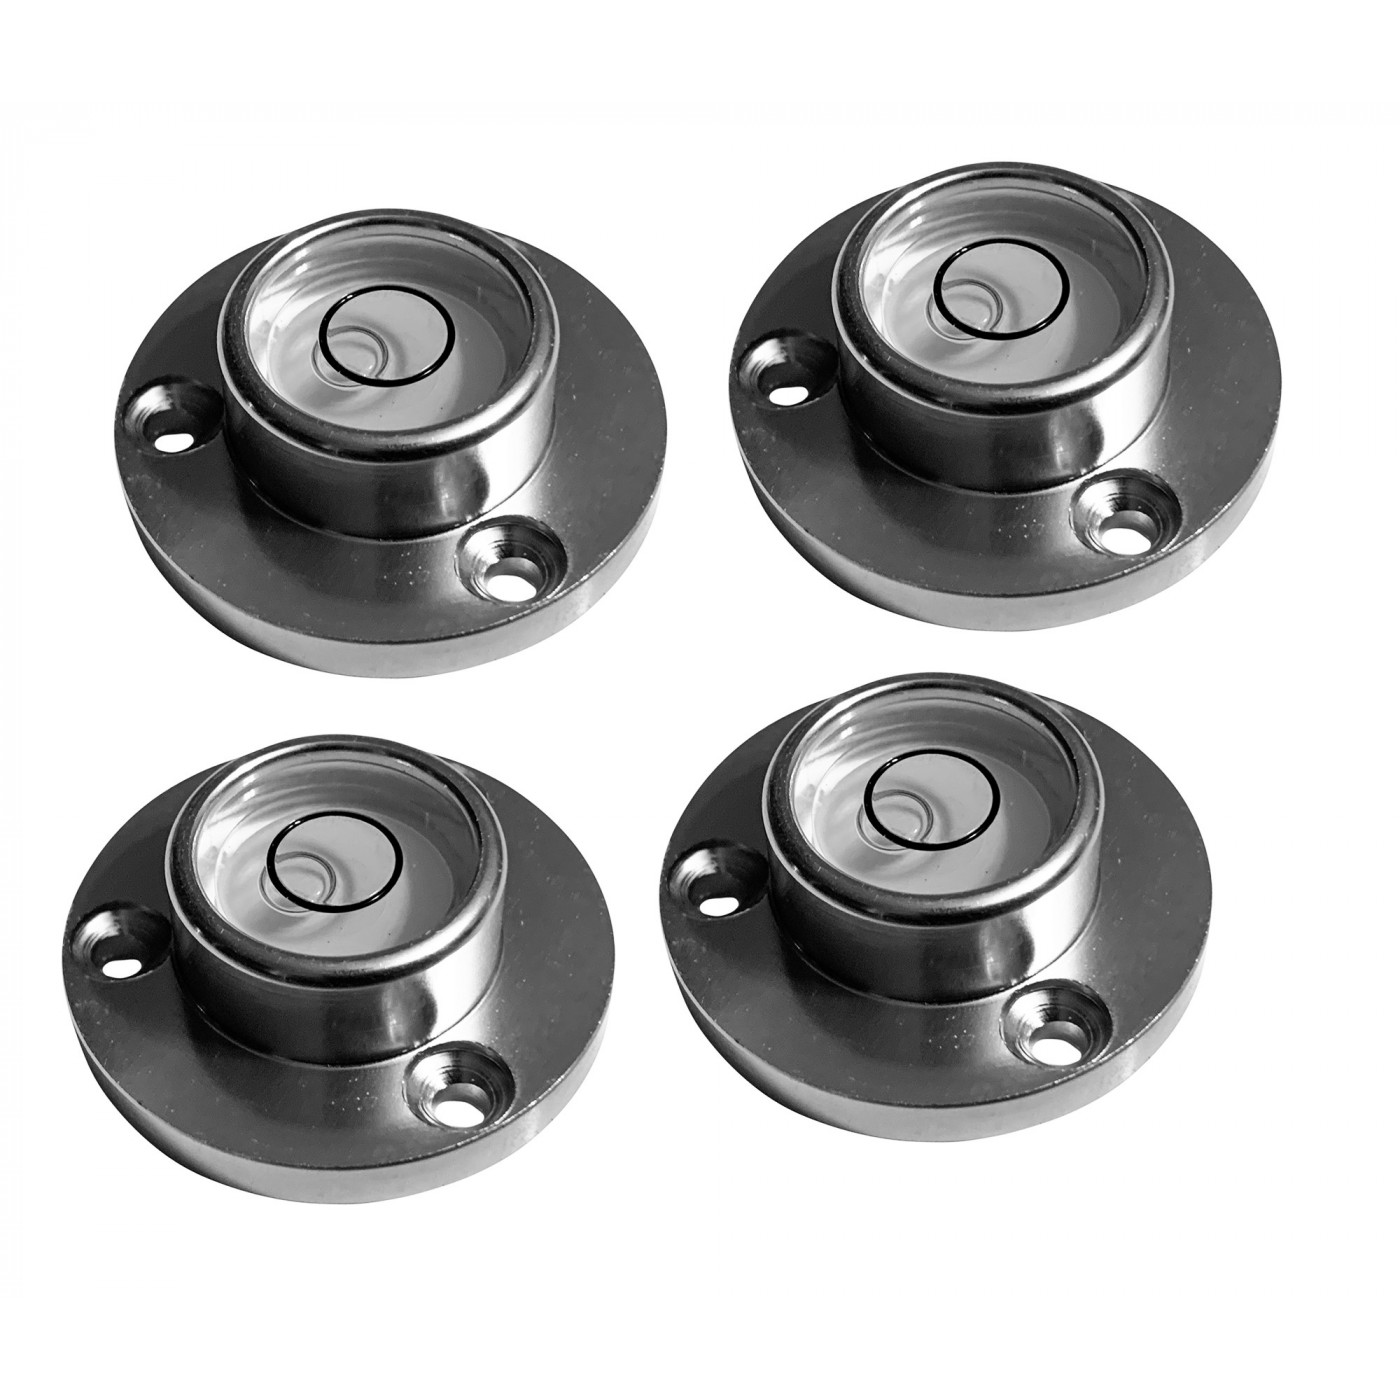 Set of 4 round bubble levels with aluminum case (34x20x12 mm